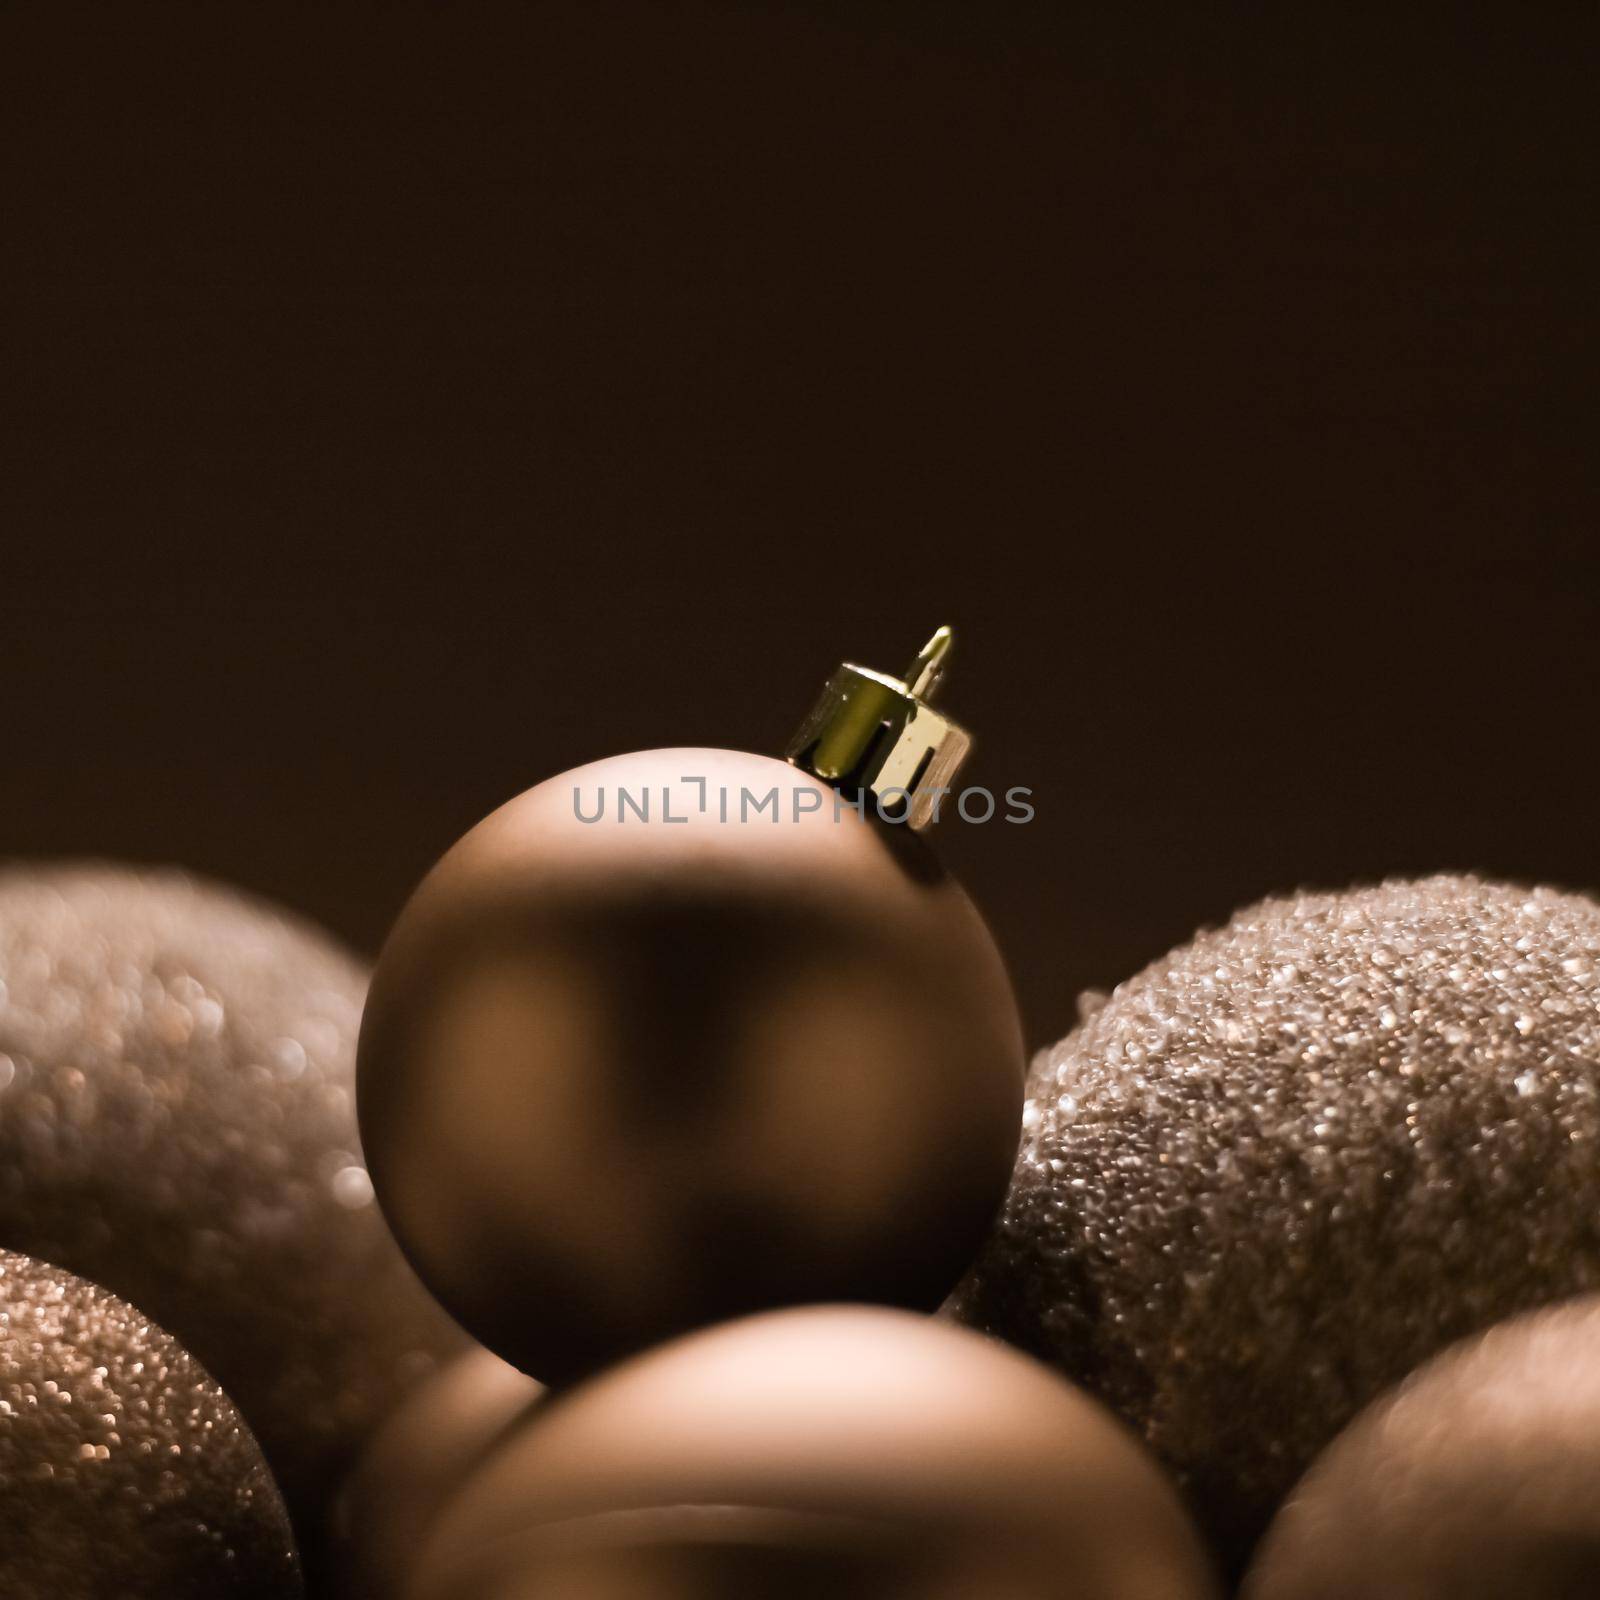 Christmas holiday and festive decoration concept. Golden baubles on beige background.